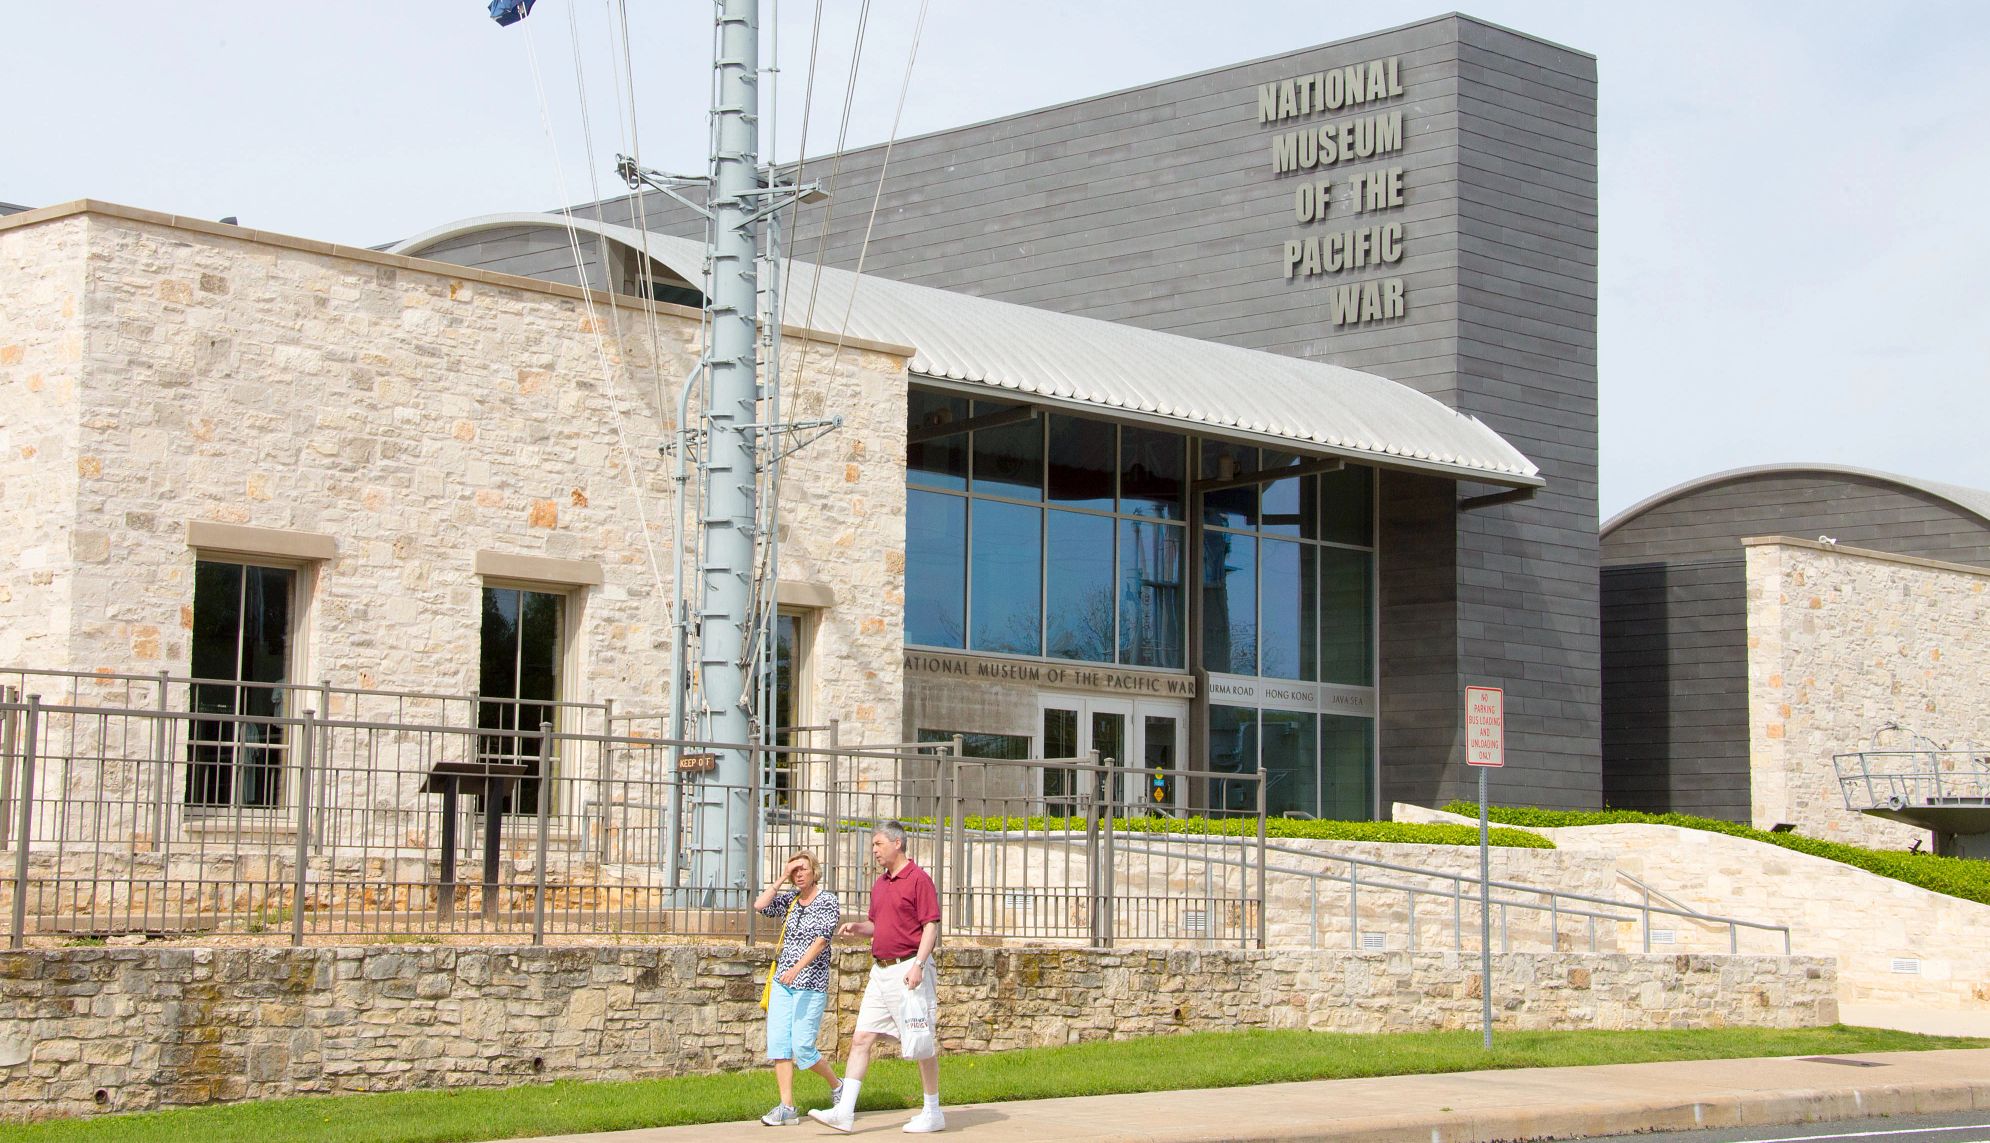 National Museum of the Pacific War in Fredericksburg, Texas